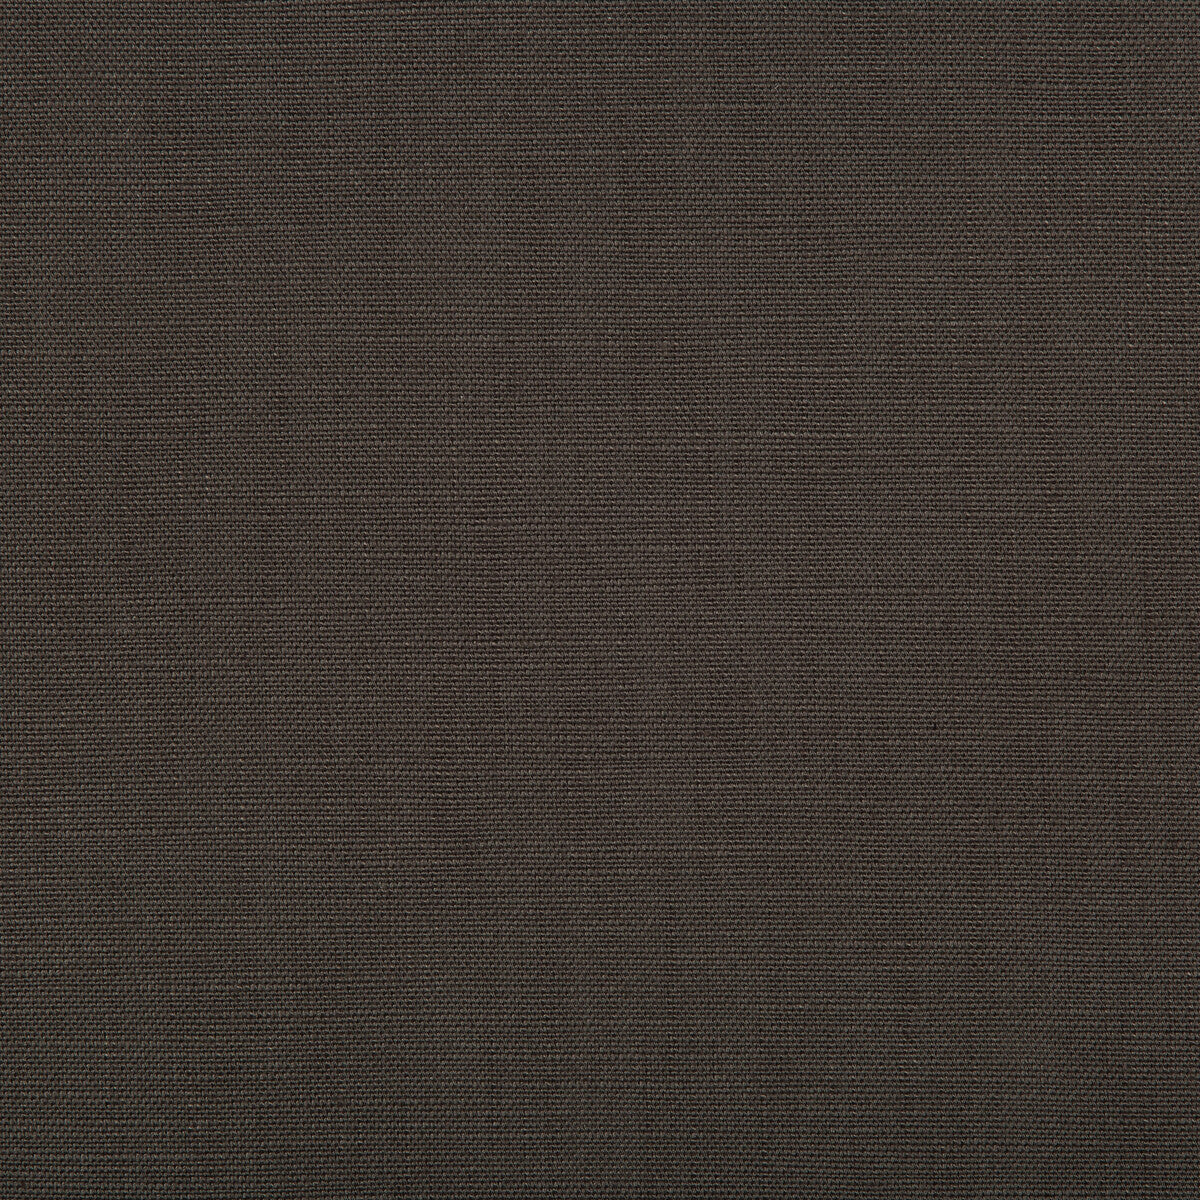 Kravet Contract fabric in 4648-21 color - pattern 4648.21.0 - by Kravet Contract